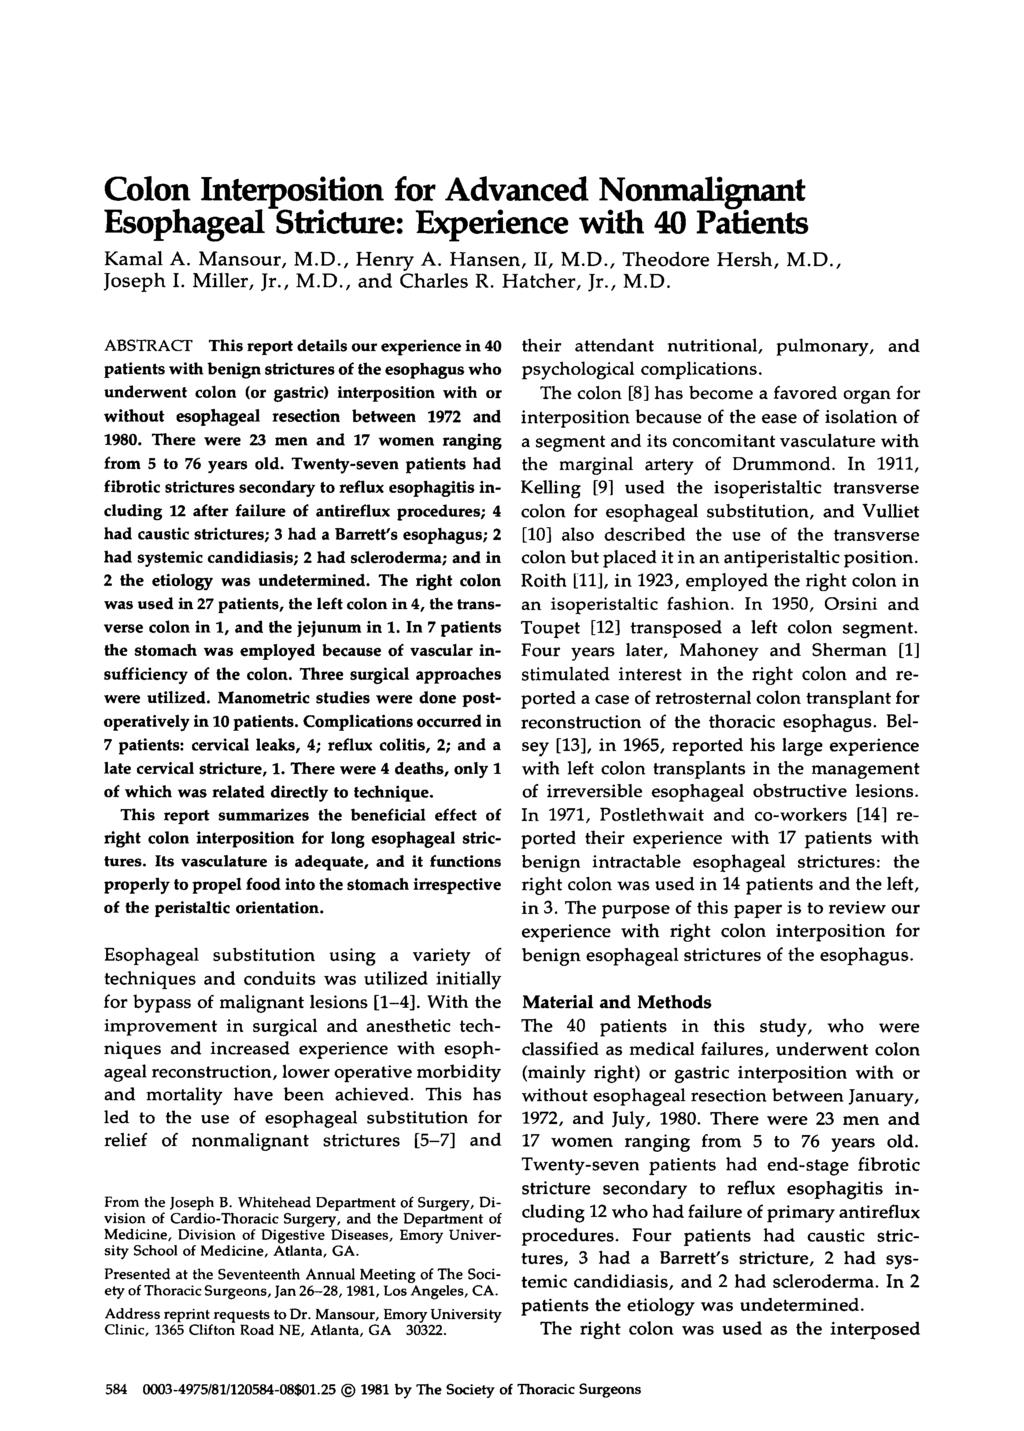 Colon Interposition for Advanced Nonmalignant Esophageal Stricture: Experience with 40 Patients Kamal A. Mansour, M.D., Henry A. Hansen, 11, M.D., Theodore Hersh, M.D., Joseph I. Miller, Jr., M.D., and Charles R.